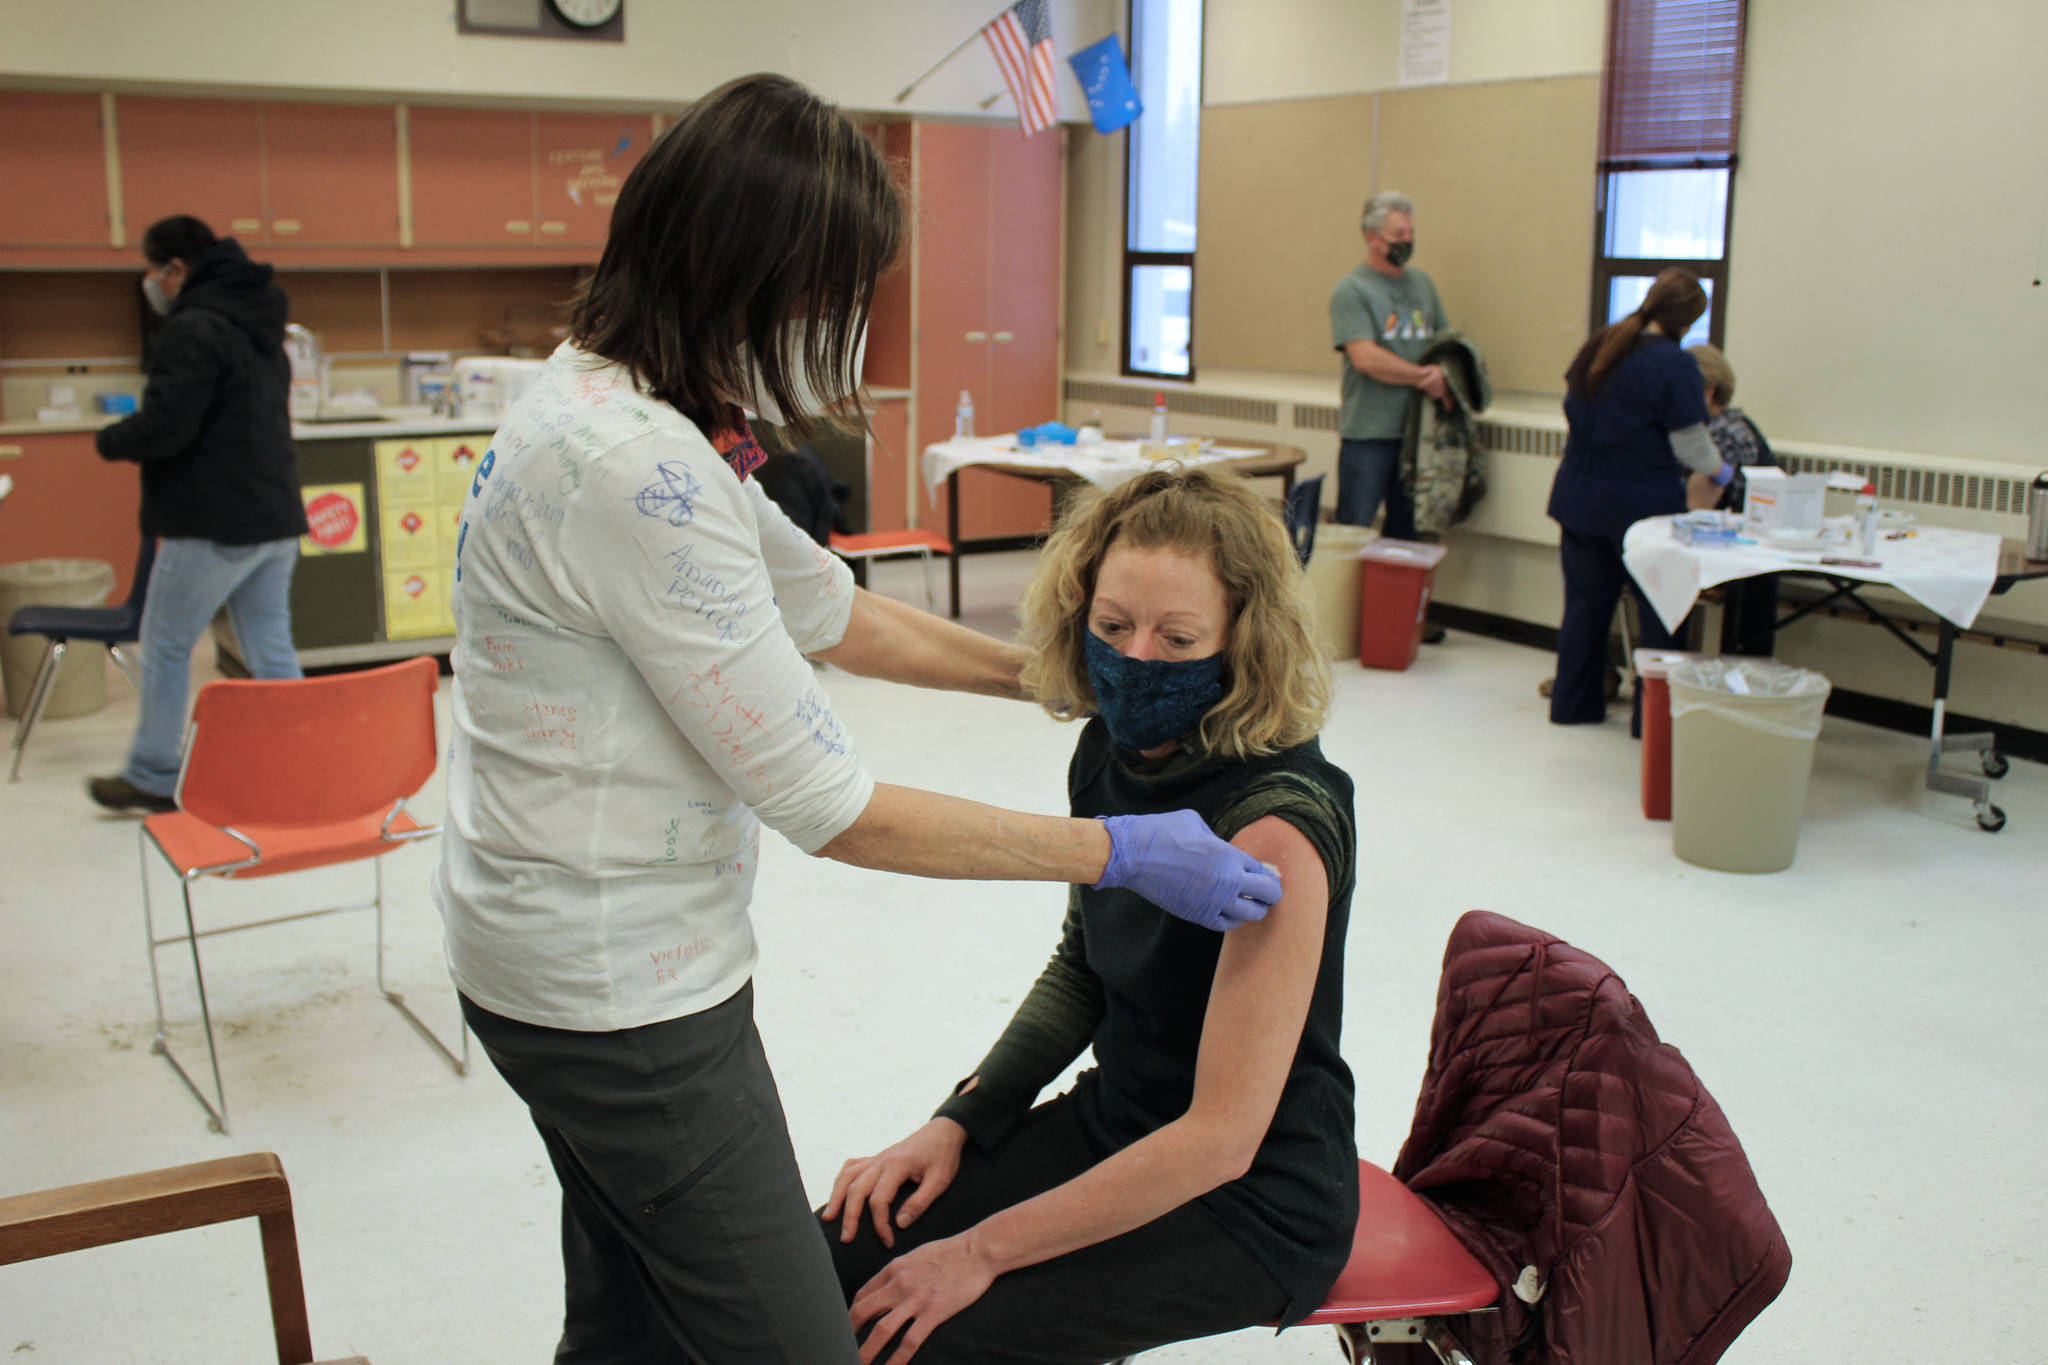 Tracy Silta (left) administers a dose of a COVID-19 vaccine to Melissa Linton during a vaccine clinic at Soldotna Prep School on Friday, Feb. 26, 2021 in Soldotna, Alaska. (Photo by Ashlyn O’Hara/Peninsula Clarion)